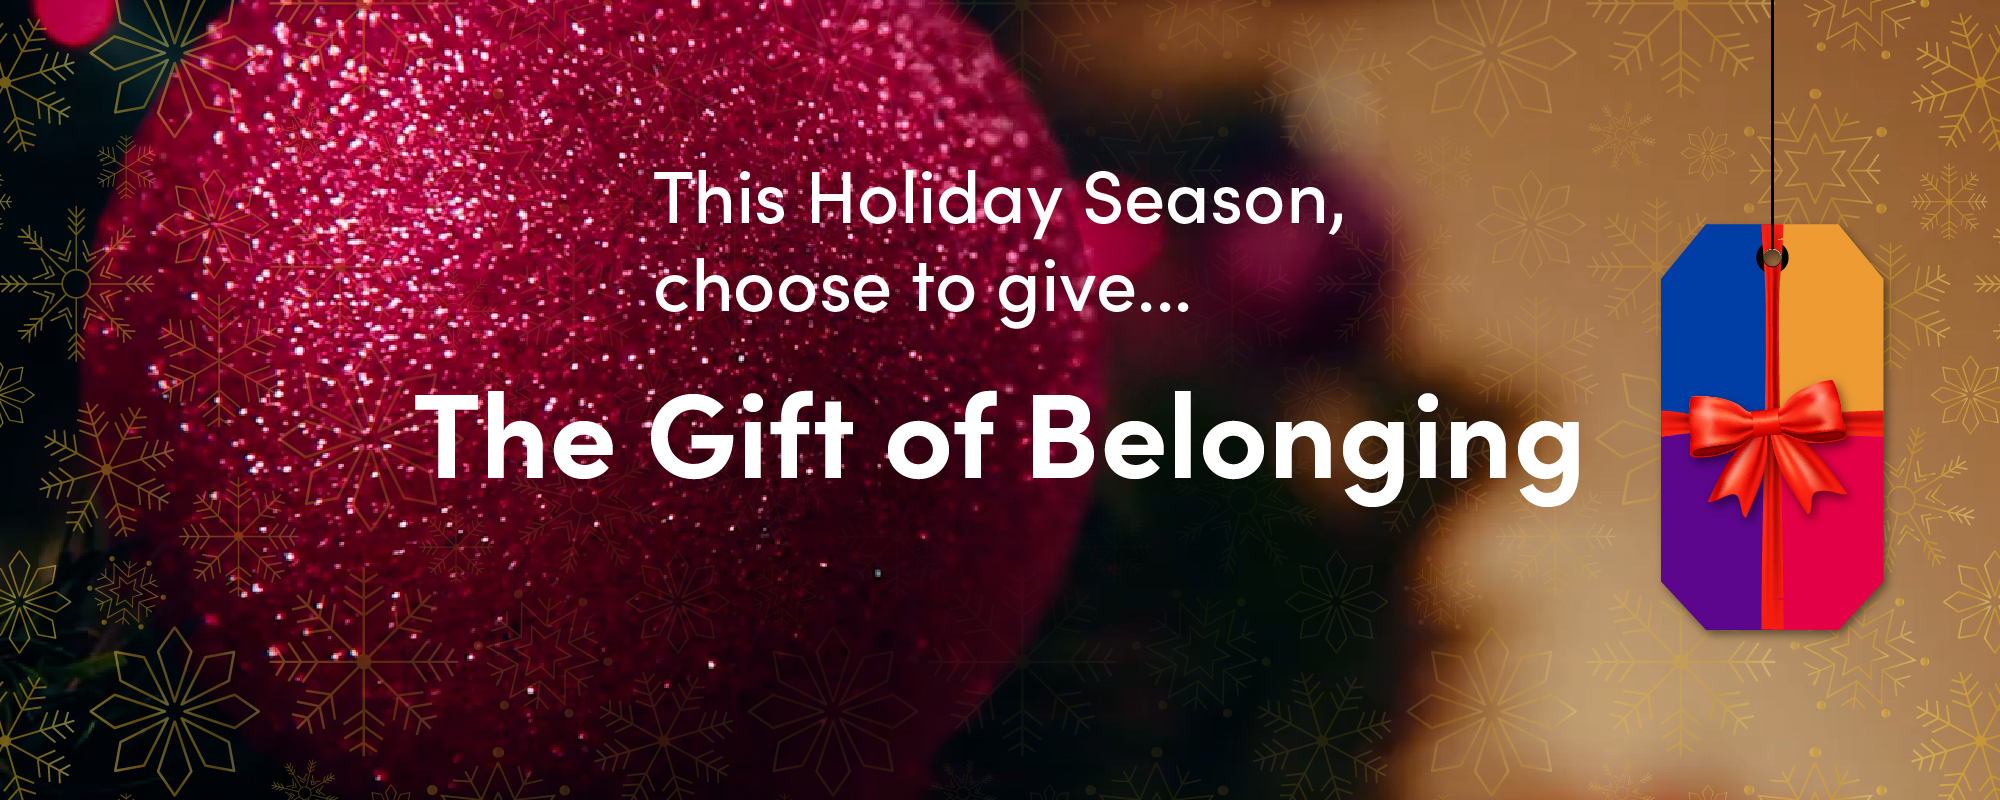 This Holiday Season, choose to give... the Gift of Belonging!